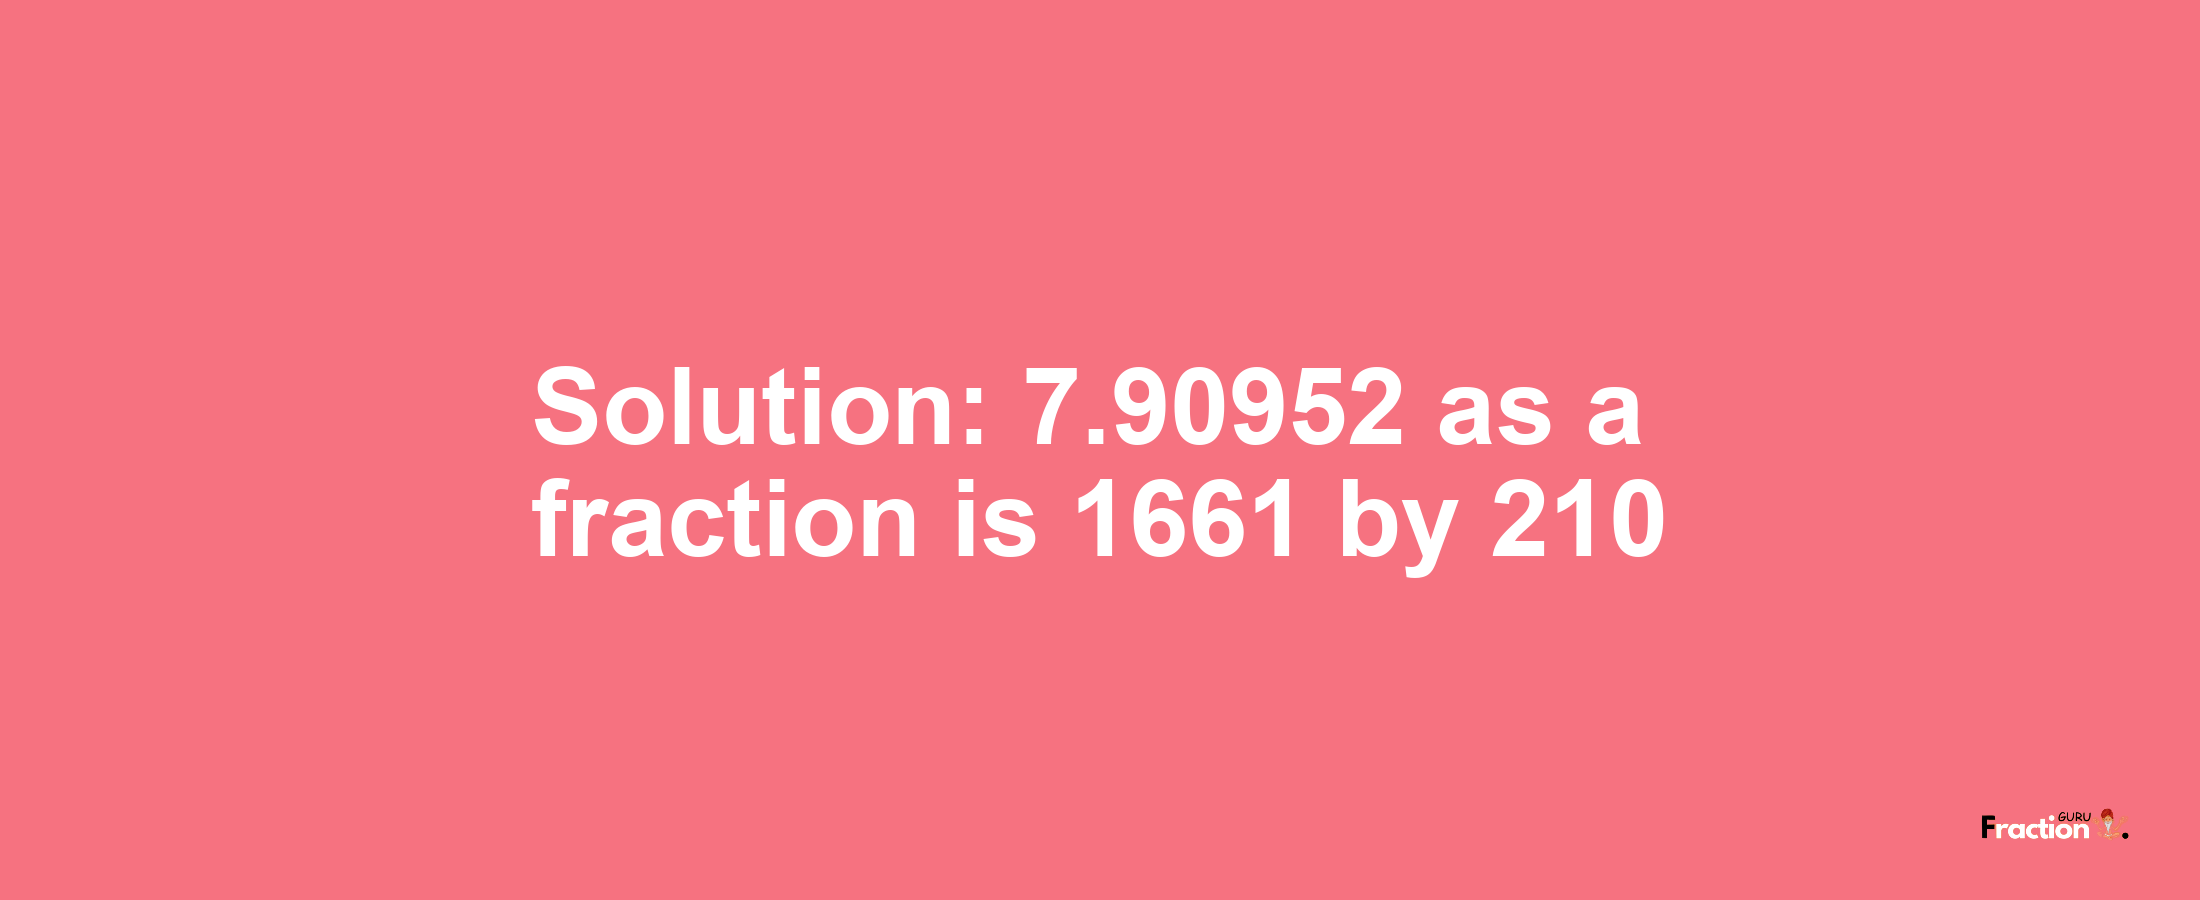 Solution:7.90952 as a fraction is 1661/210